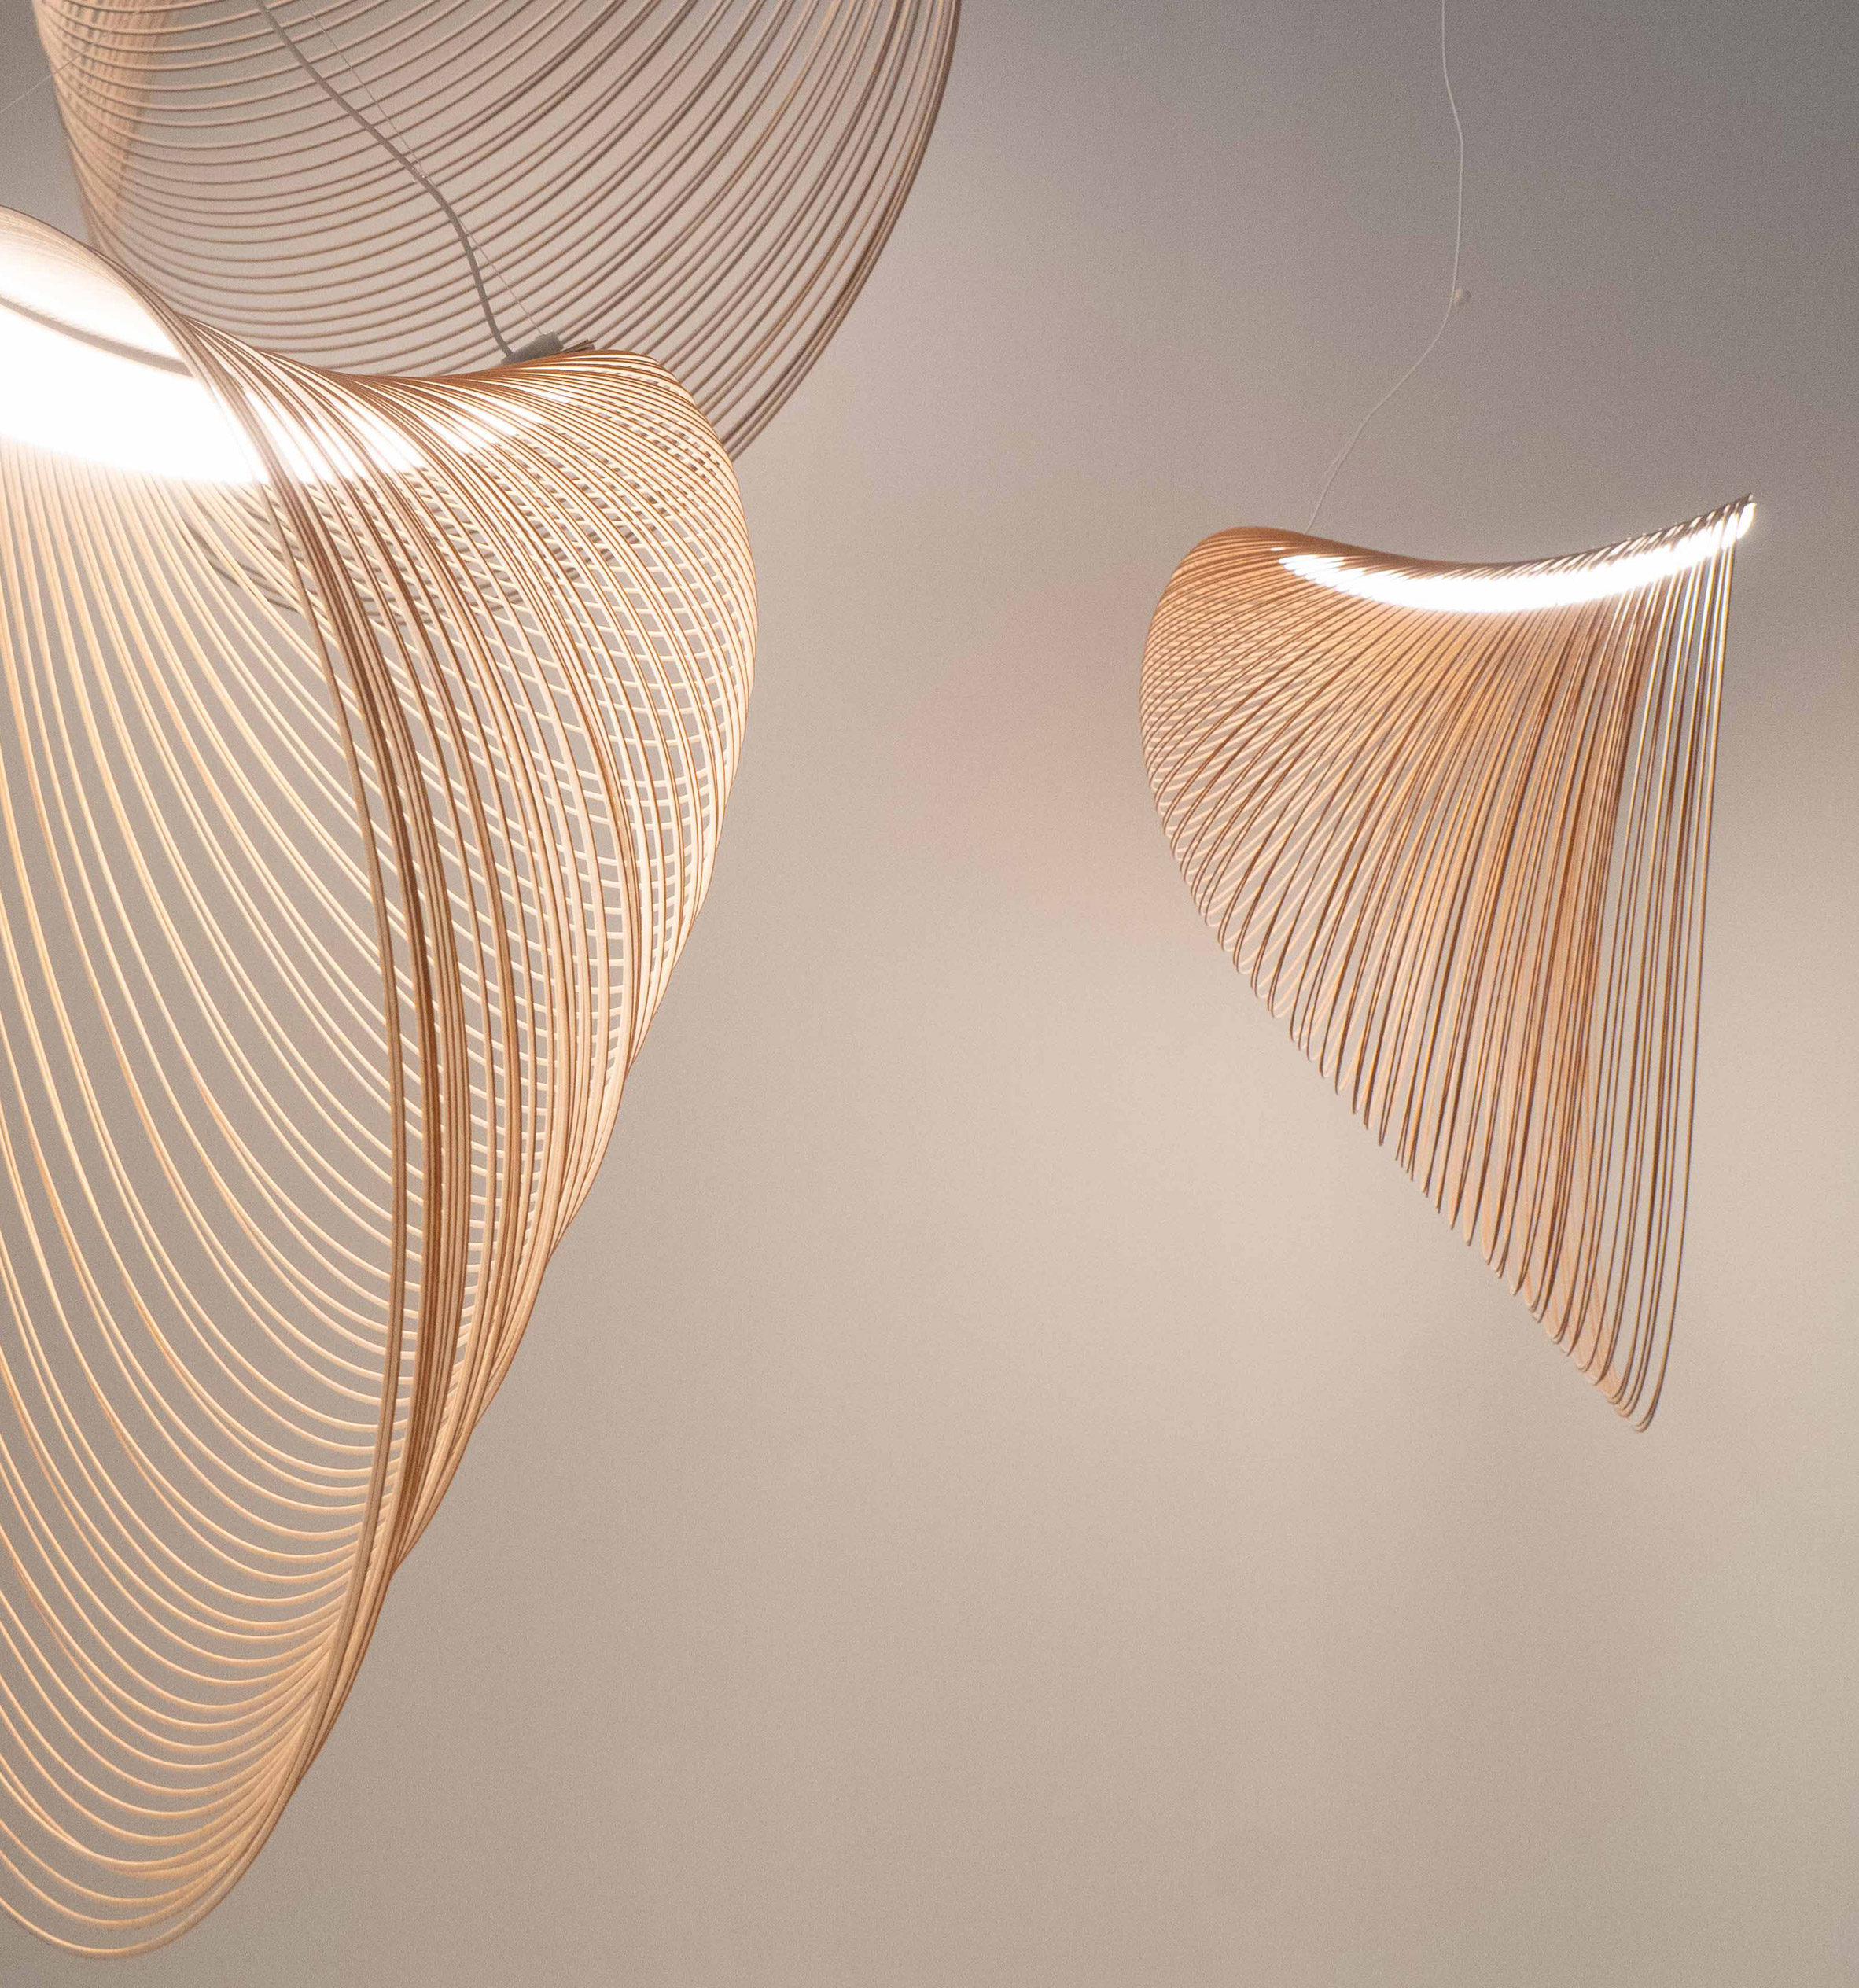 Three sizes of Illan Pendant Light designed by Zsuzsanna Horvath from birch plywood